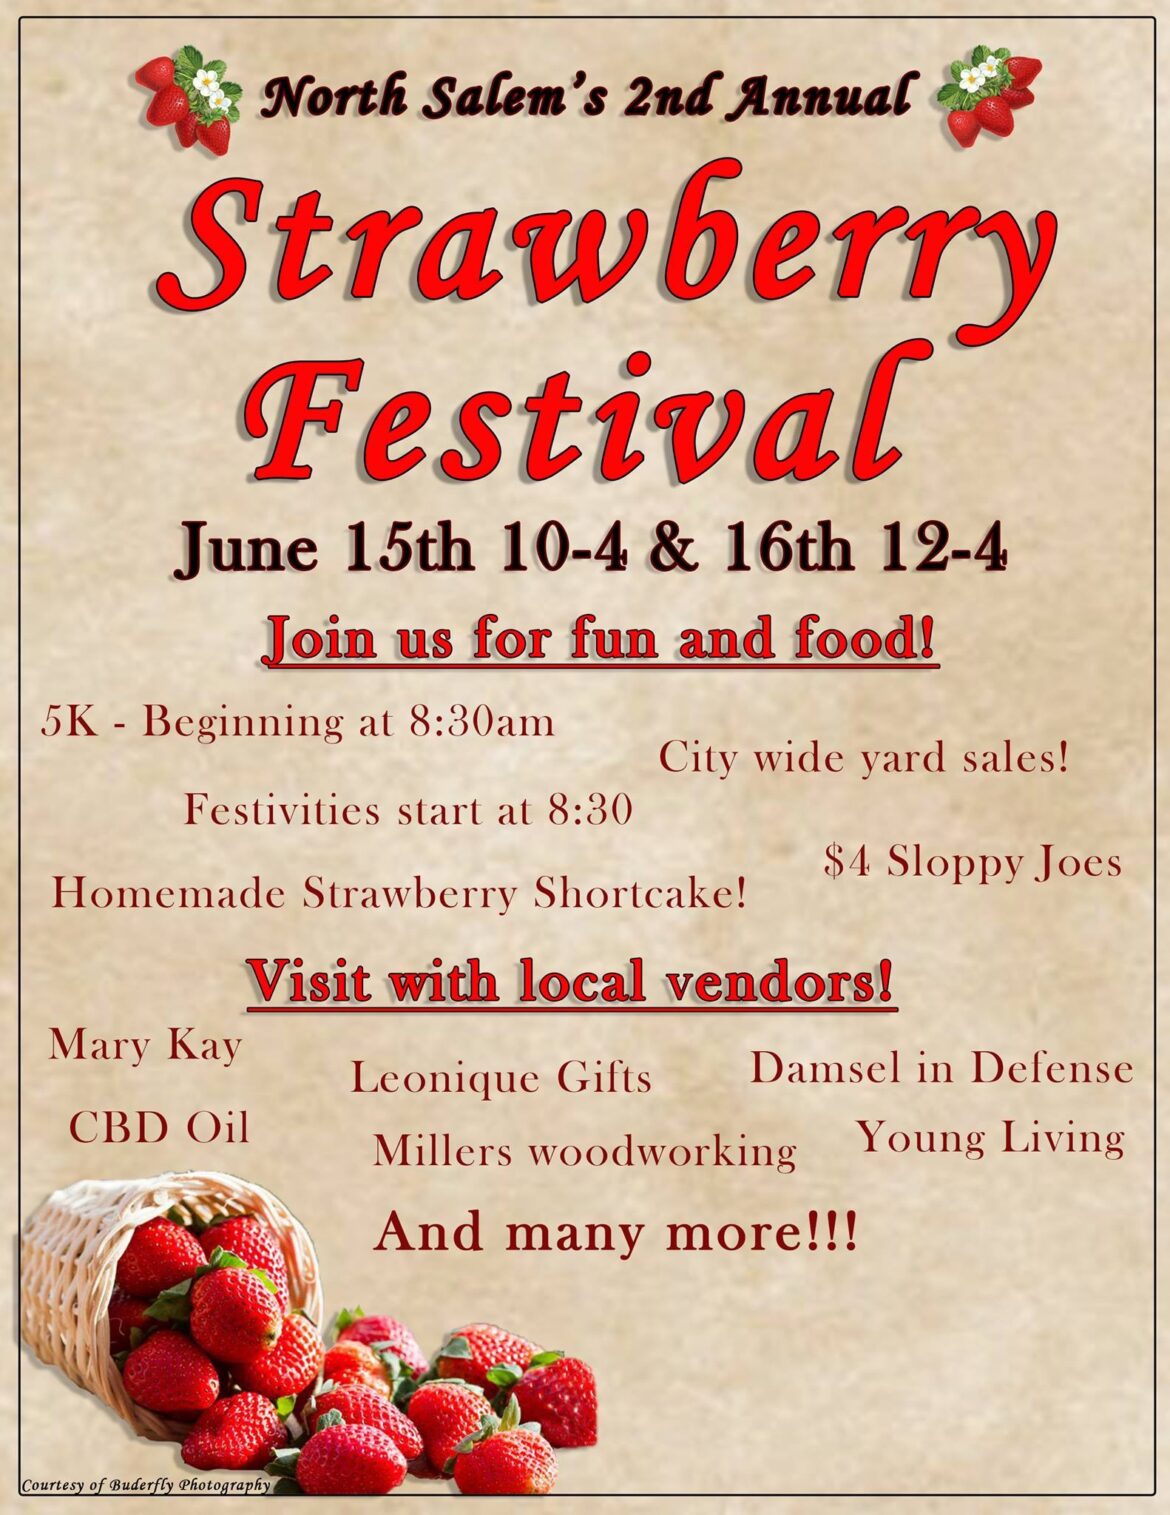 North Salem’s 2nd Annual Strawberry Festival kicks off this weekend